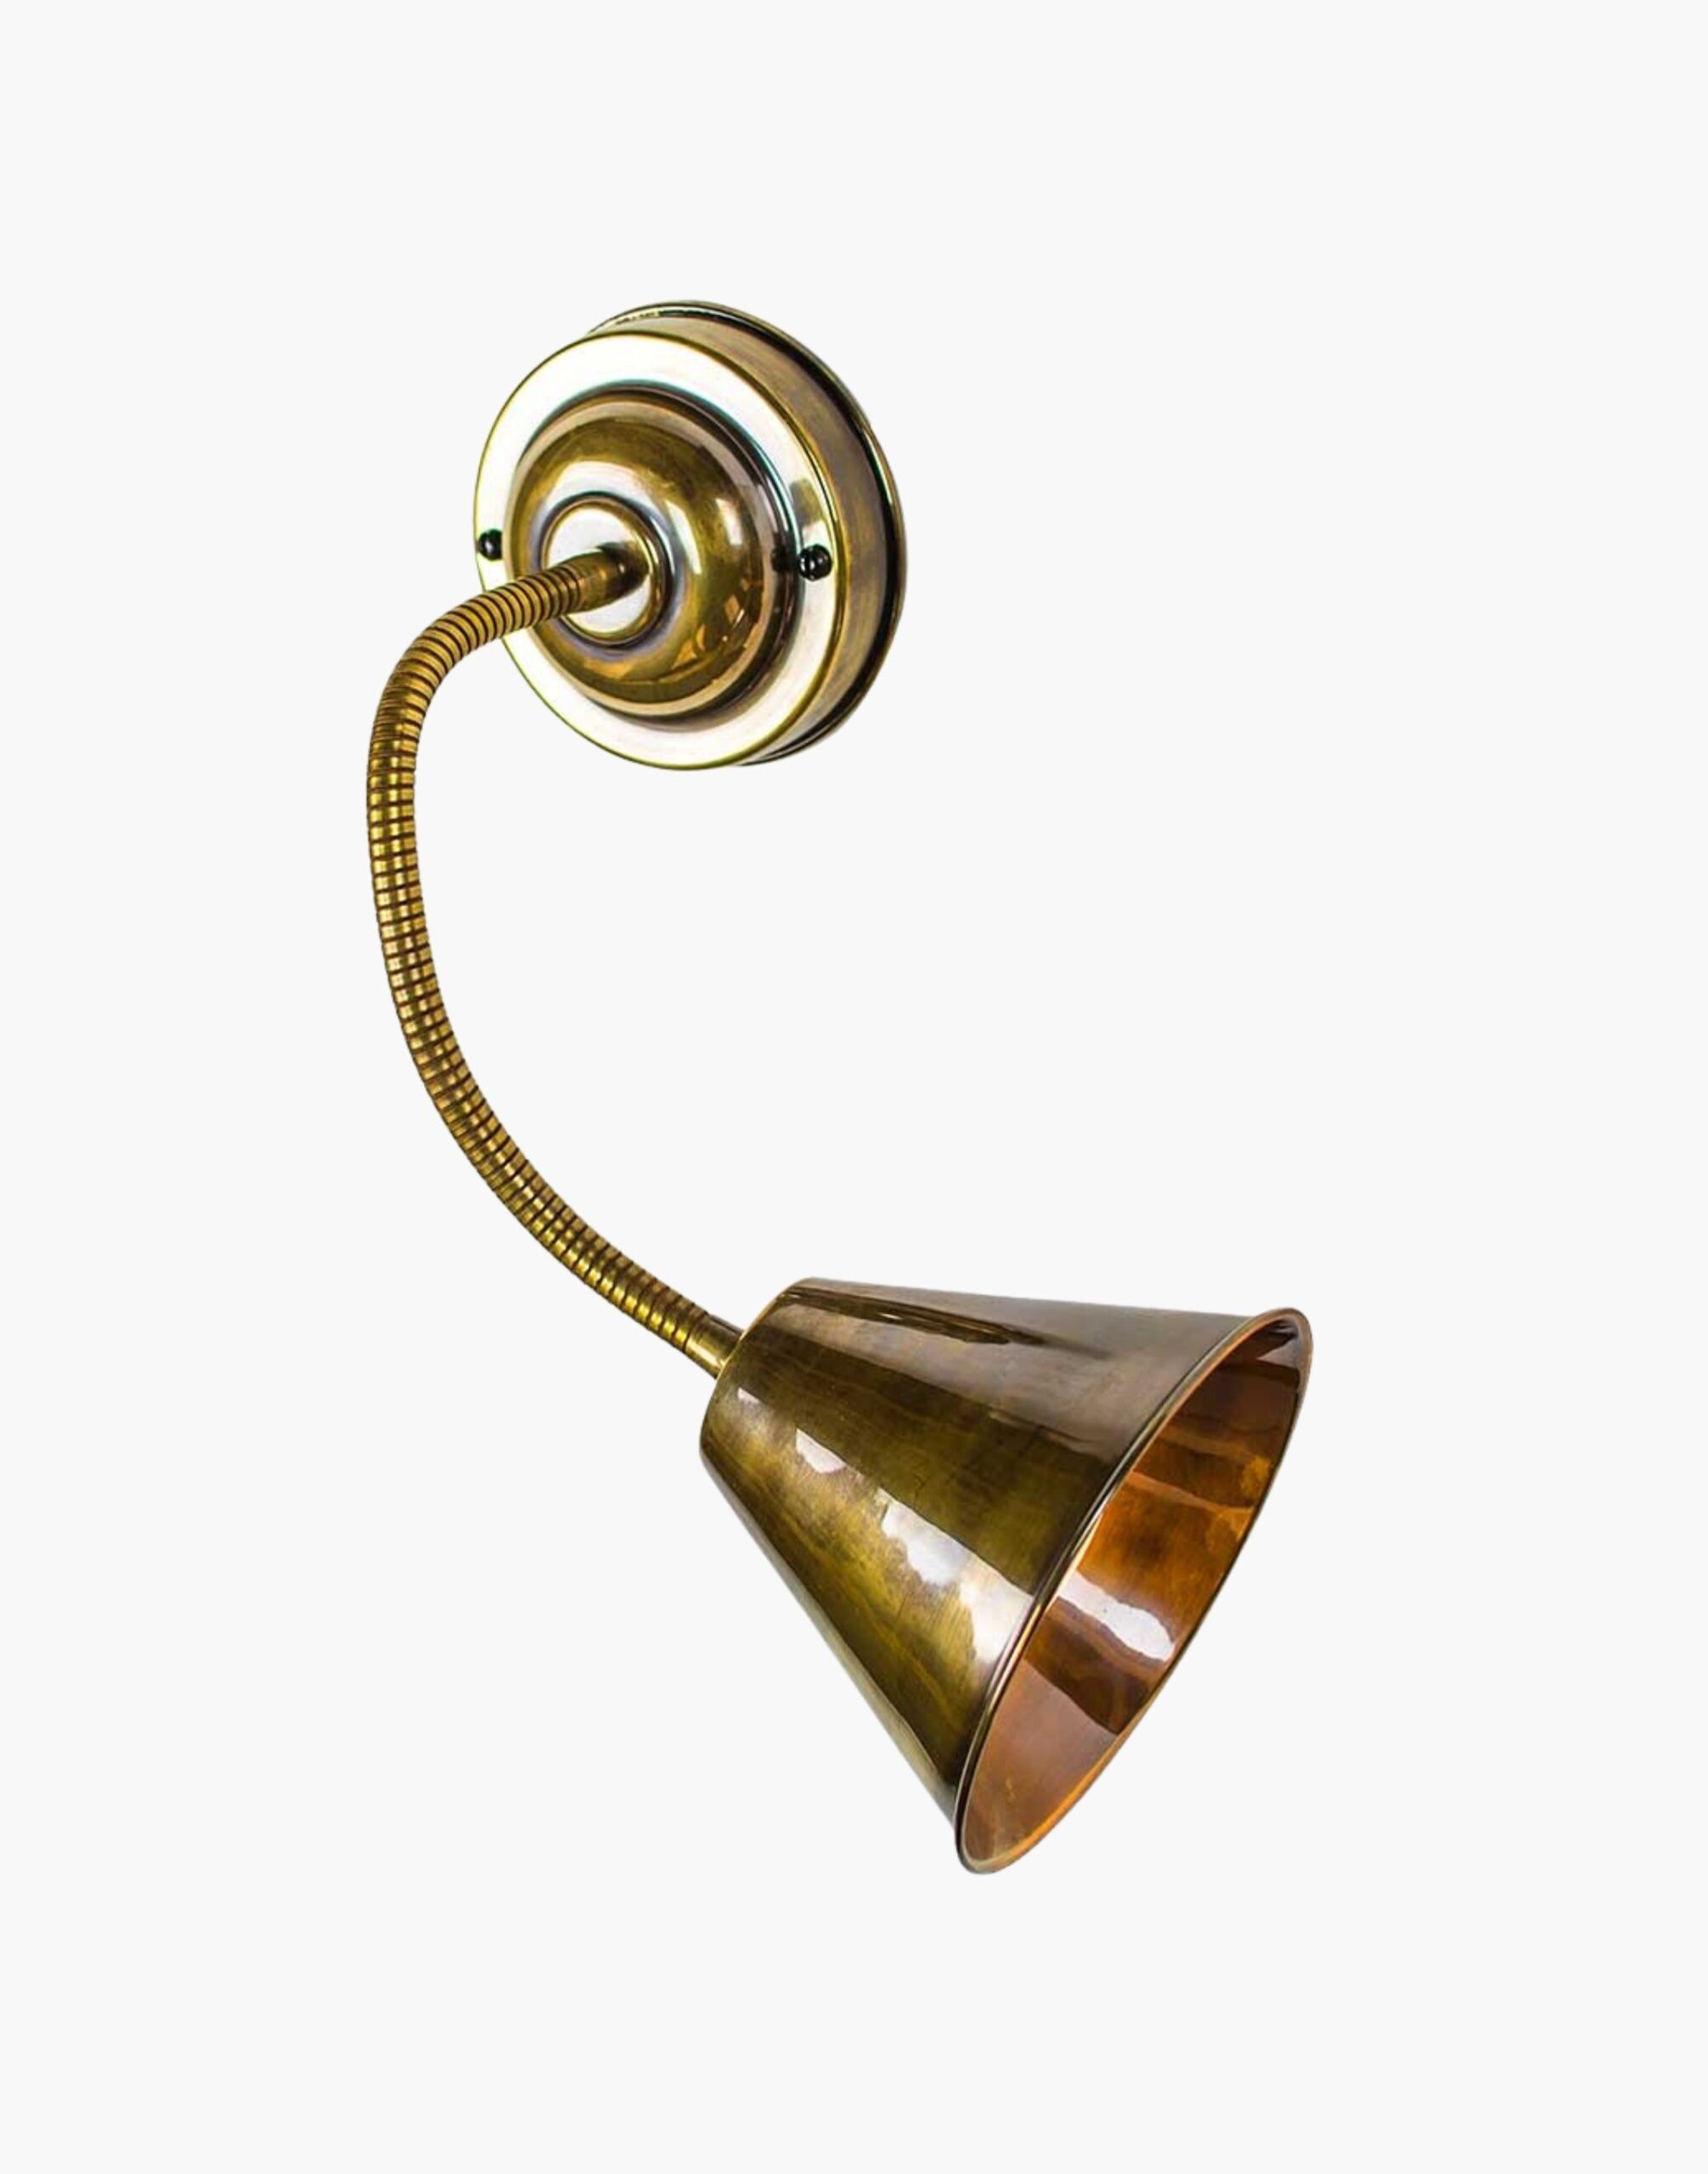 Polished Nickel Wall Lamp : The Elegance of a Polished Nickel Wall Lamp